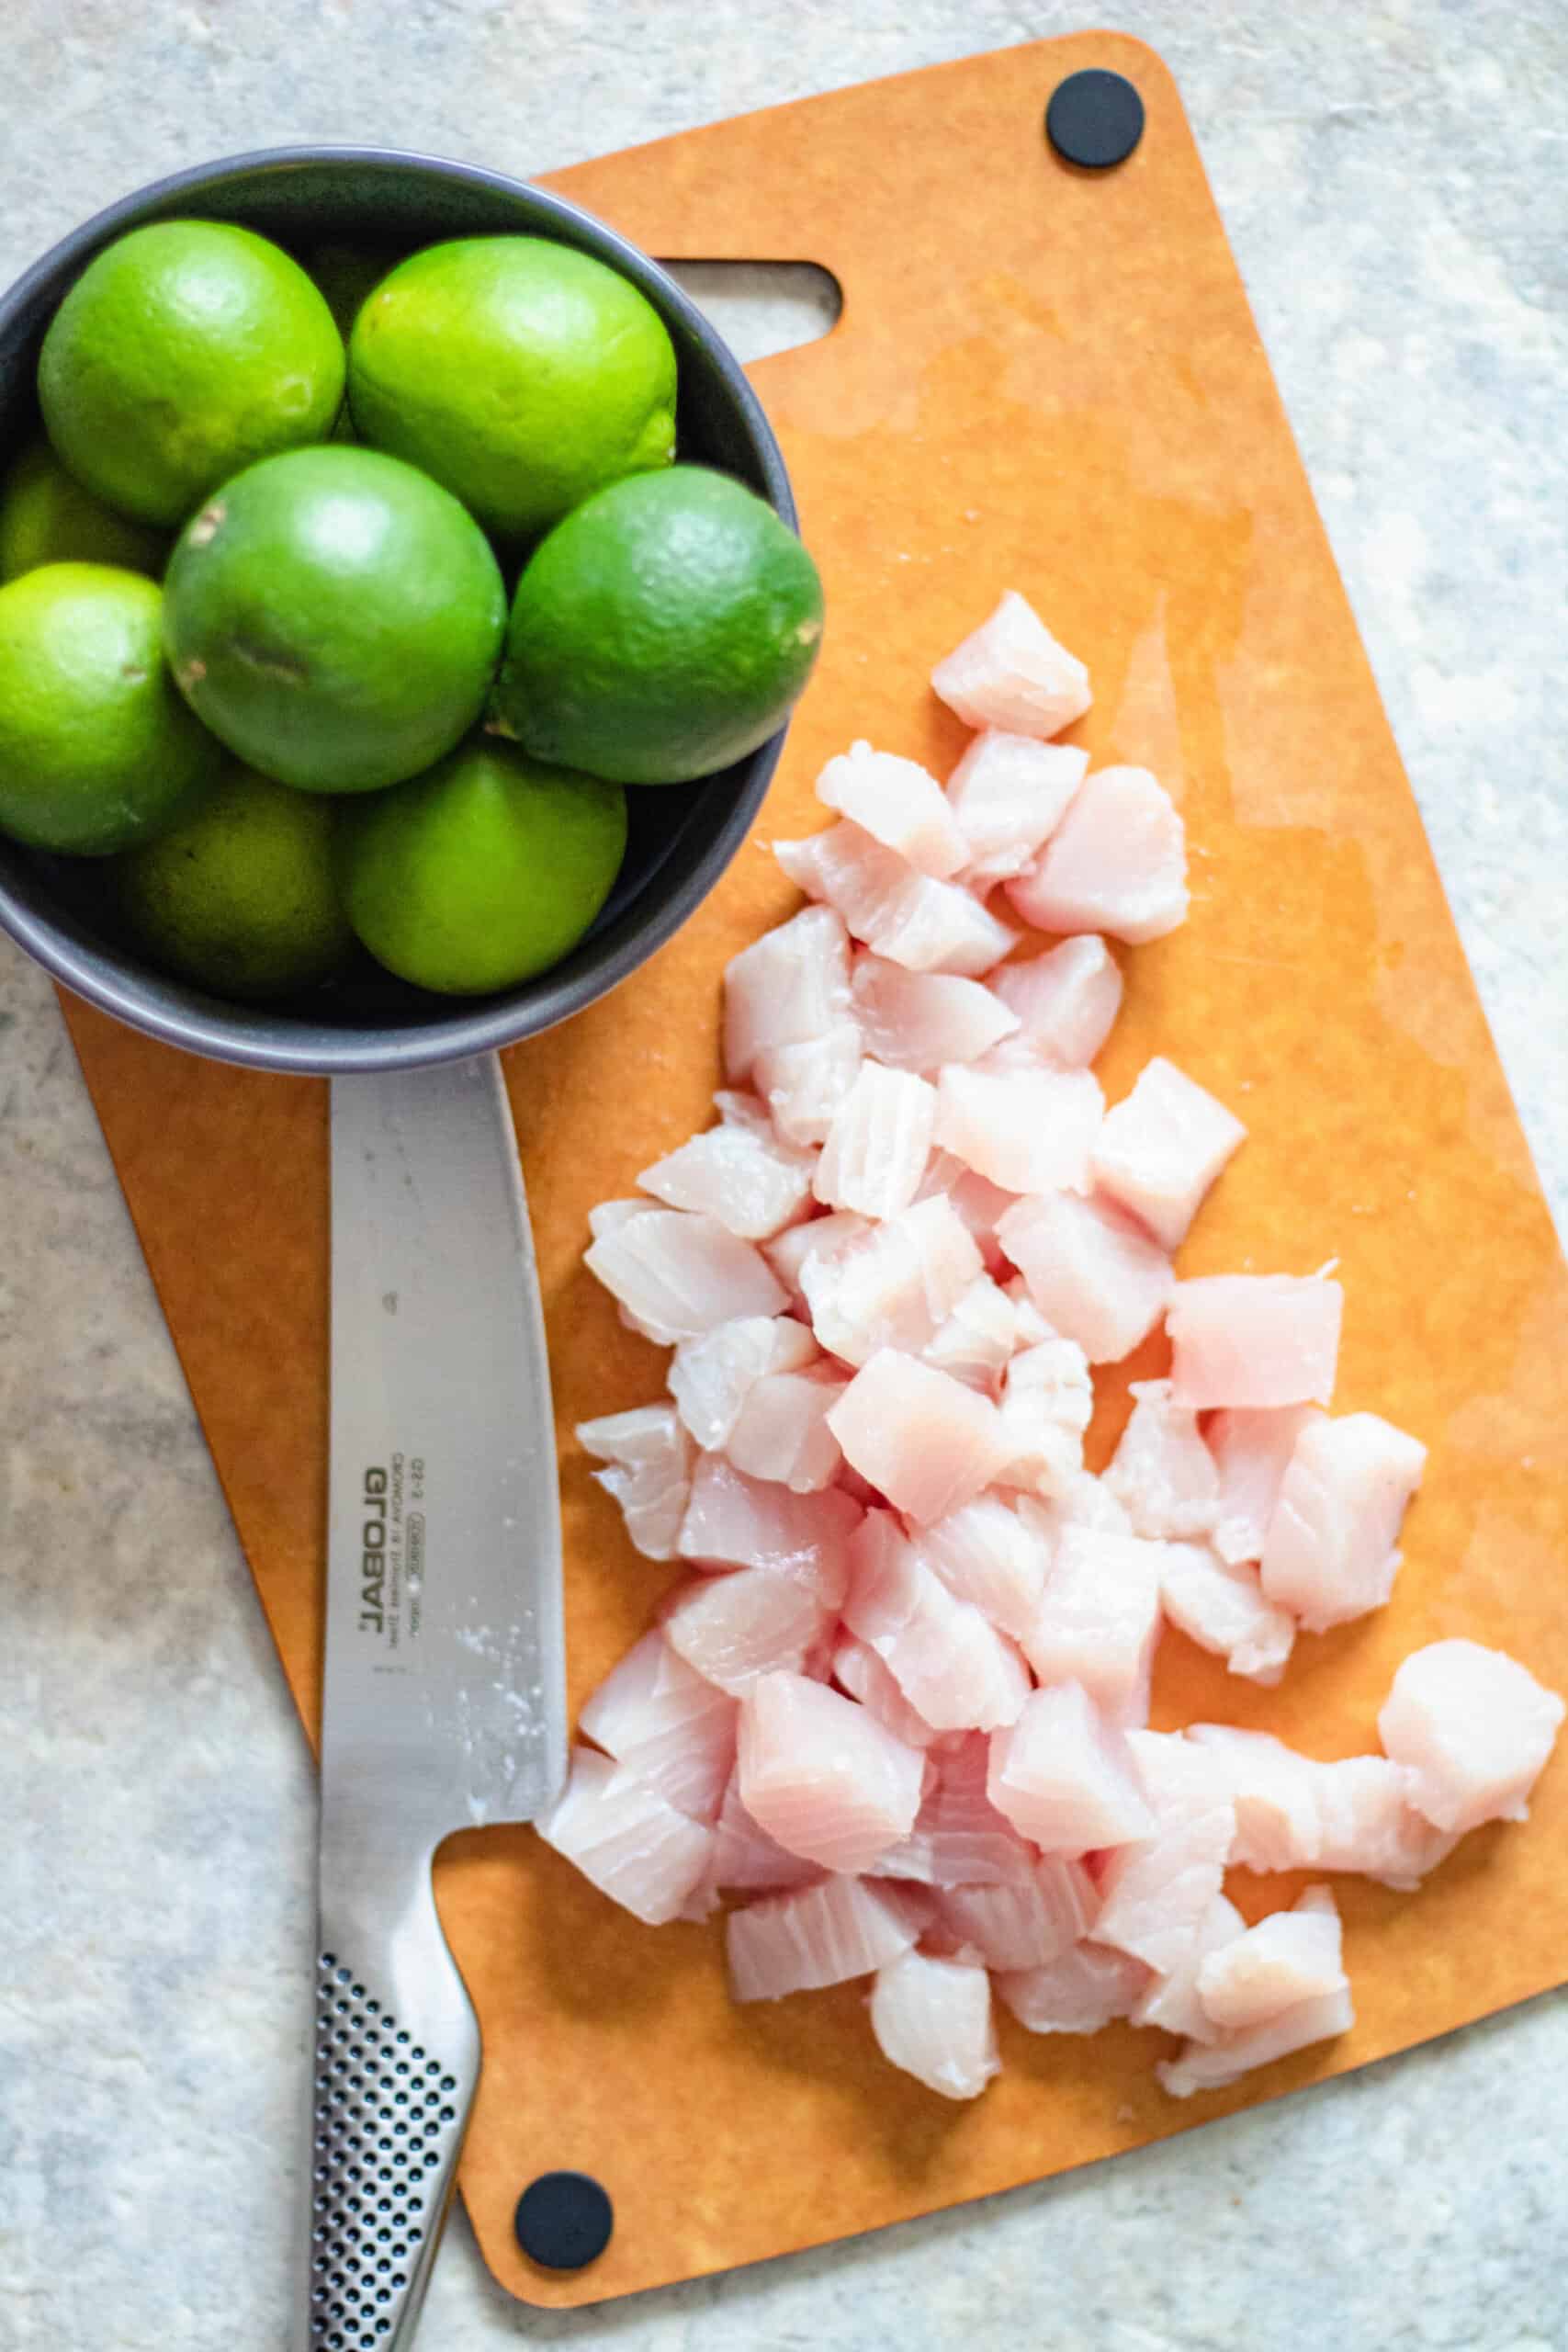 Whole limes and chunks of white fish used to prepare ceviche. 